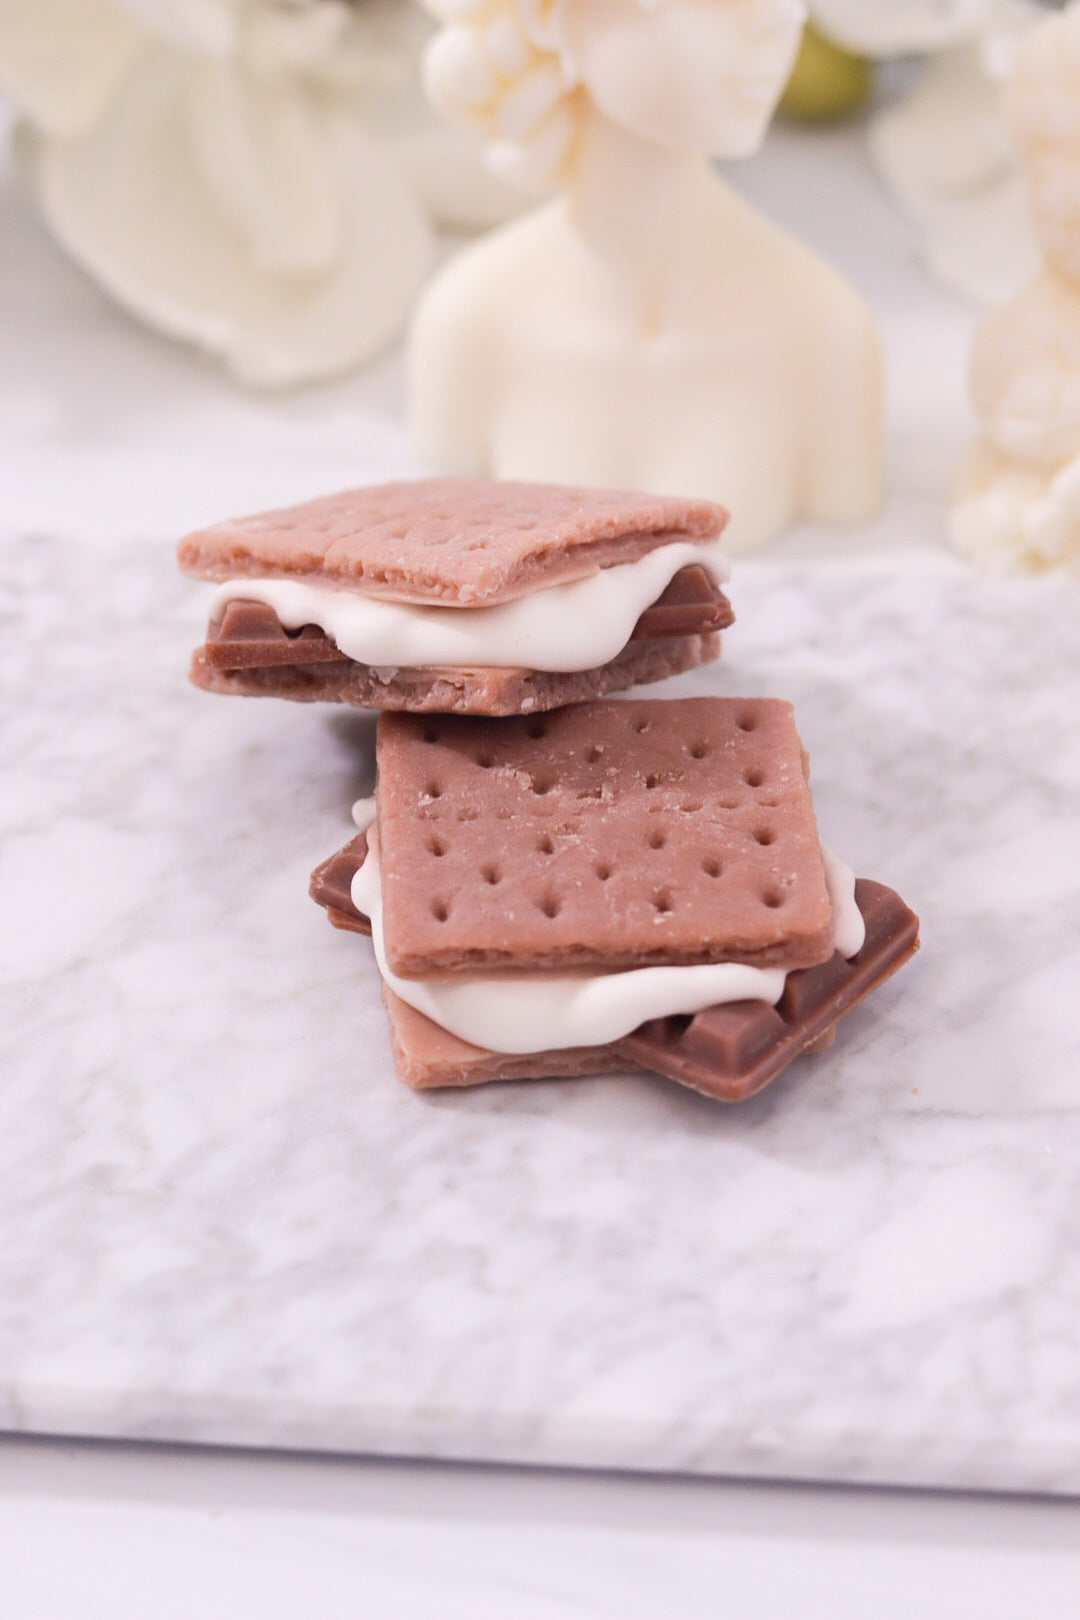 S'more Wax Melts